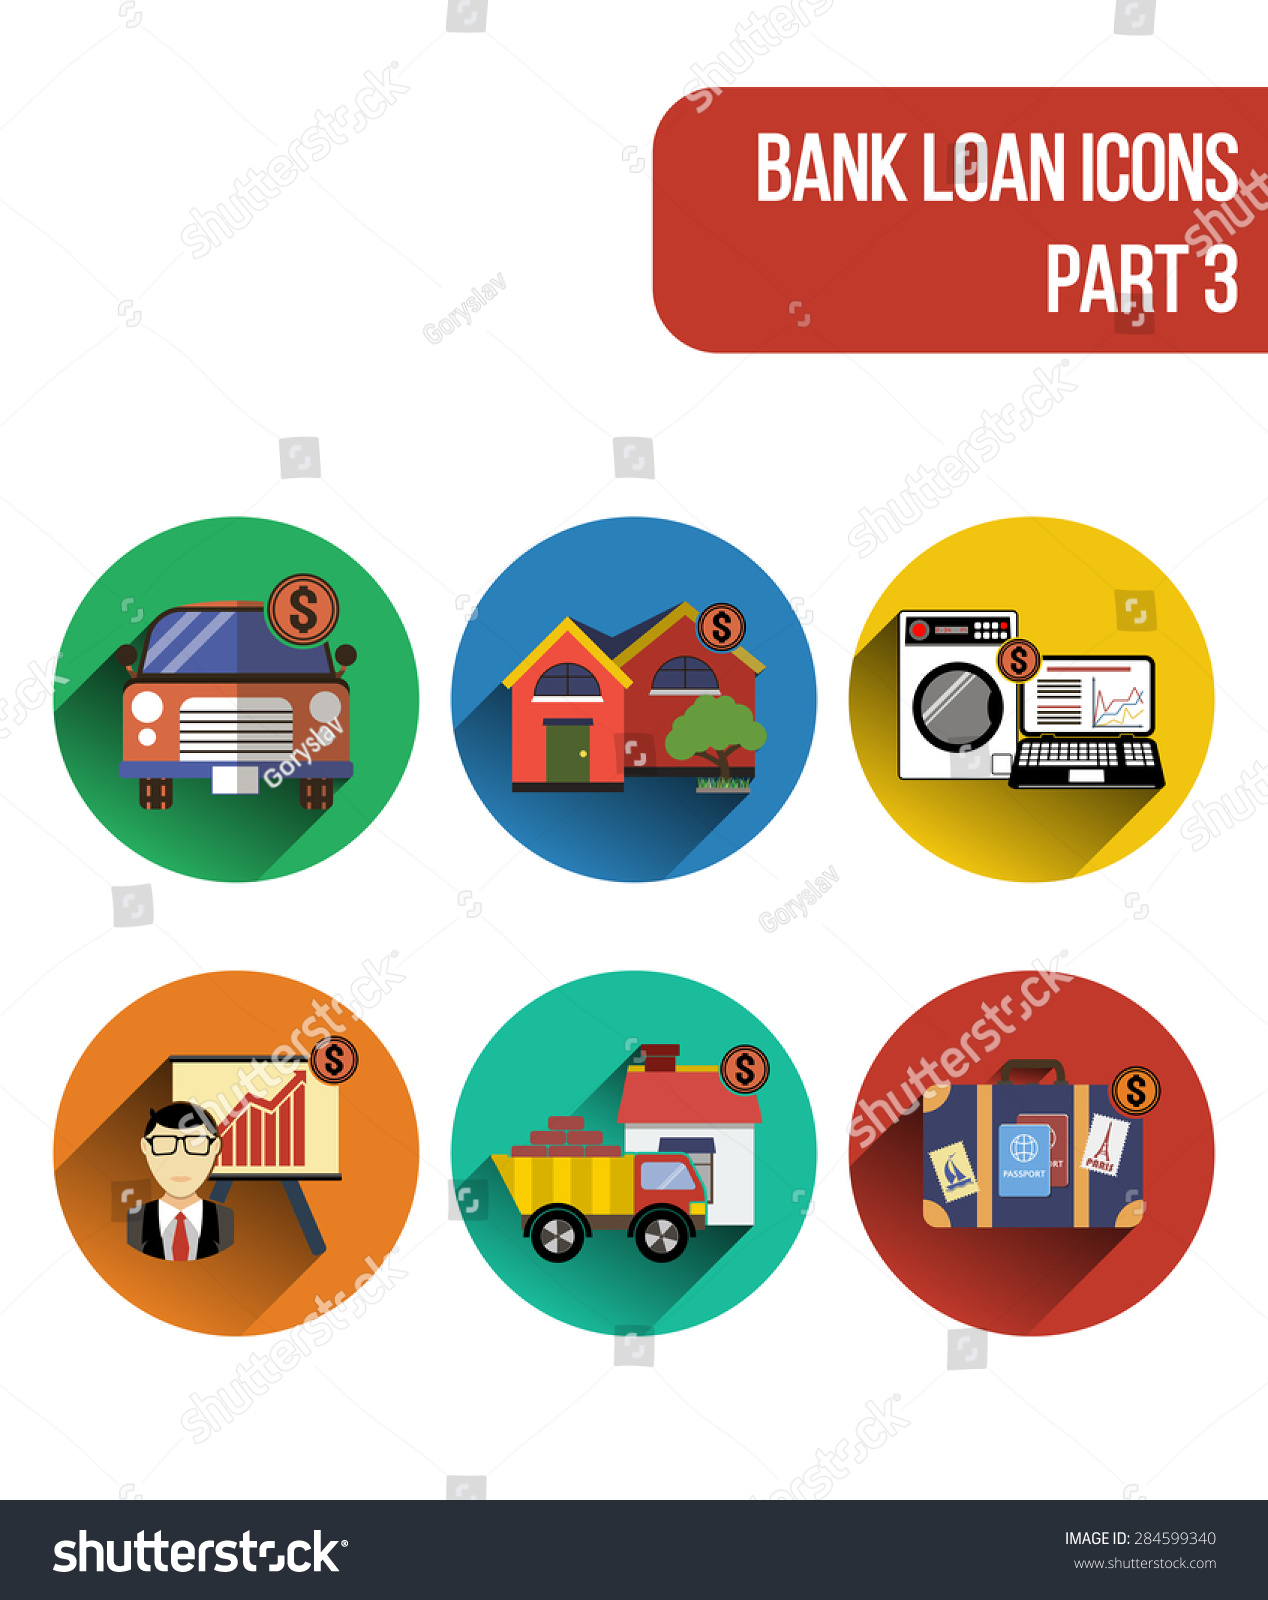 stock-vector-round-vector-flat-icons-for-various-types-of-bank-loan-services-including-mortgage-loan-auto-loan-284599340.jpg